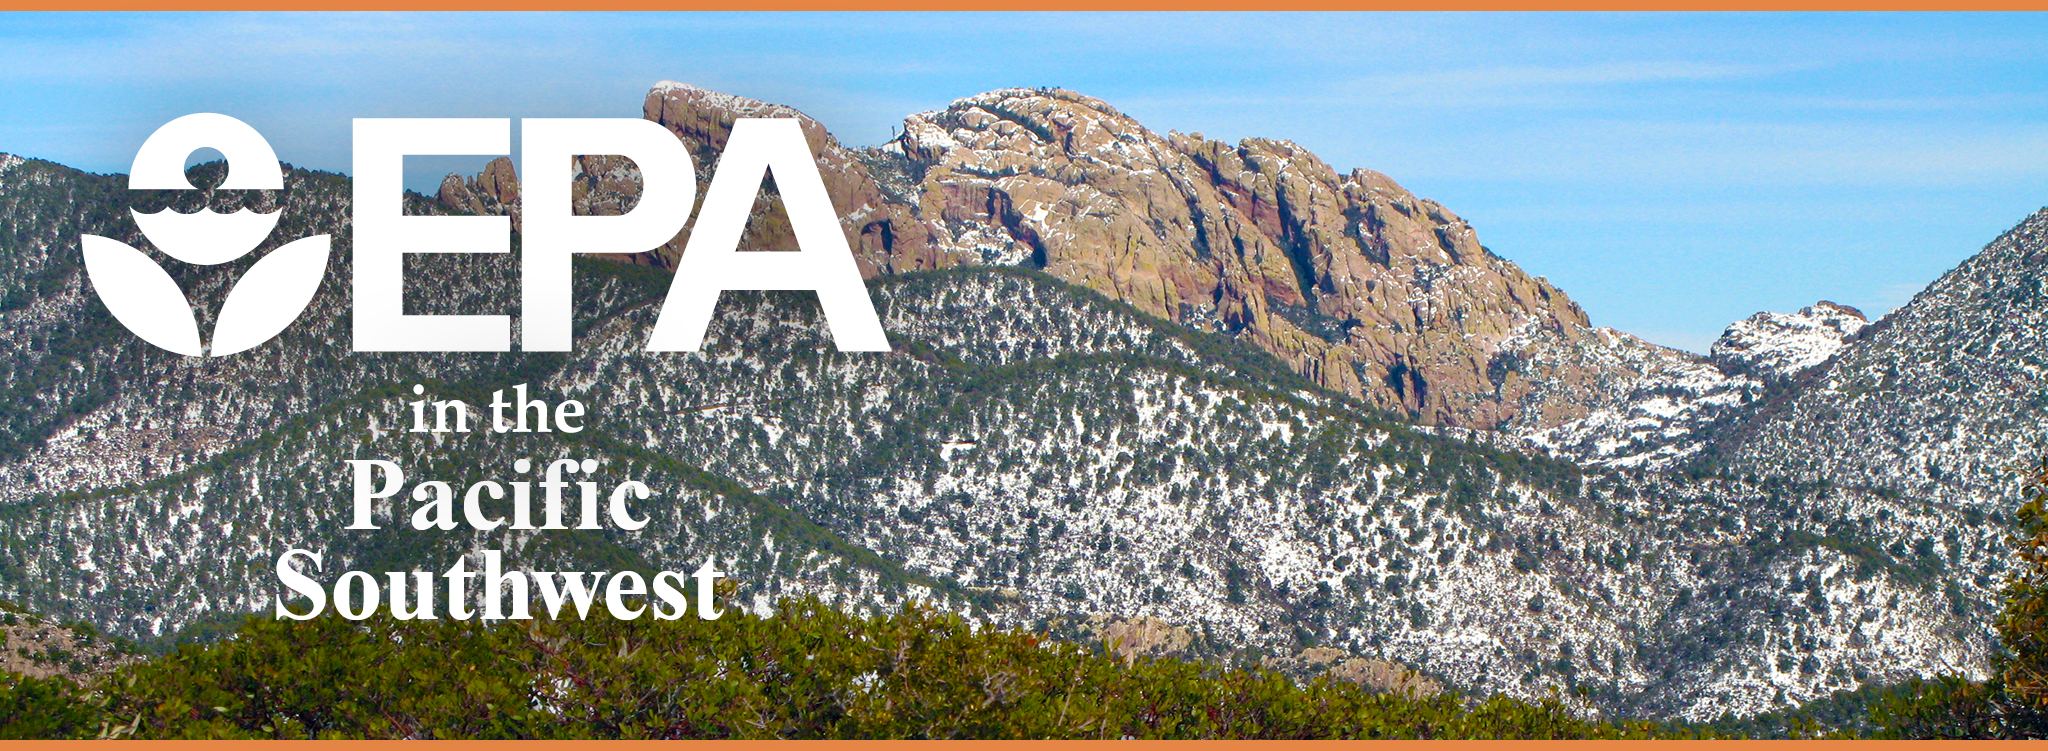 EPA in the Pacific Southwest Newsletter Banner: Chiricahua National Monument - Photo Courtesy of NPS